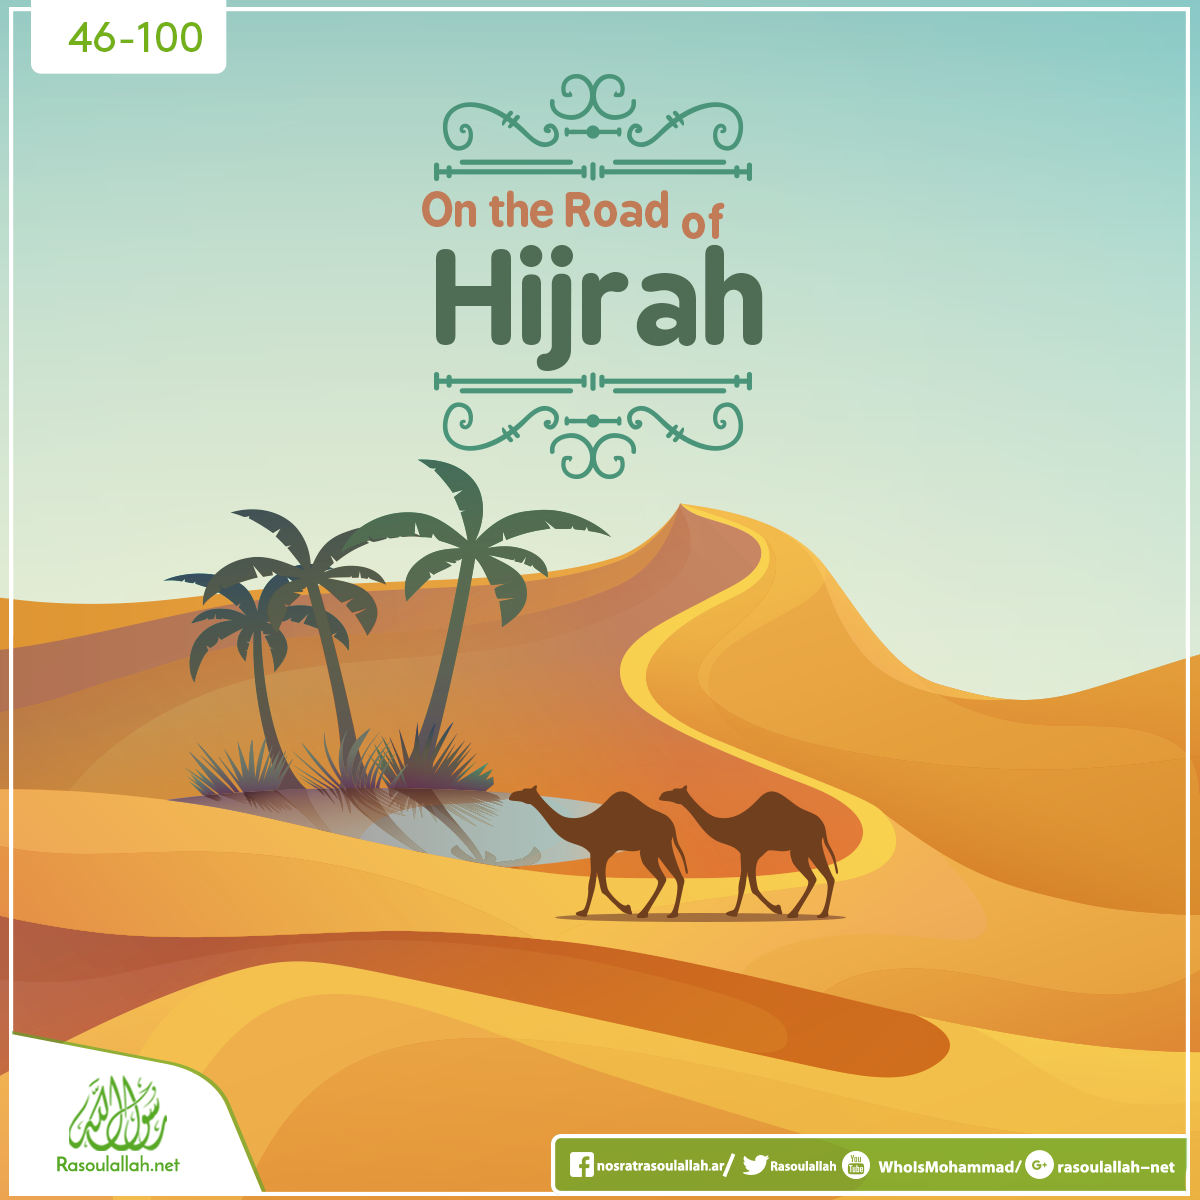 On the Road of Hijrah